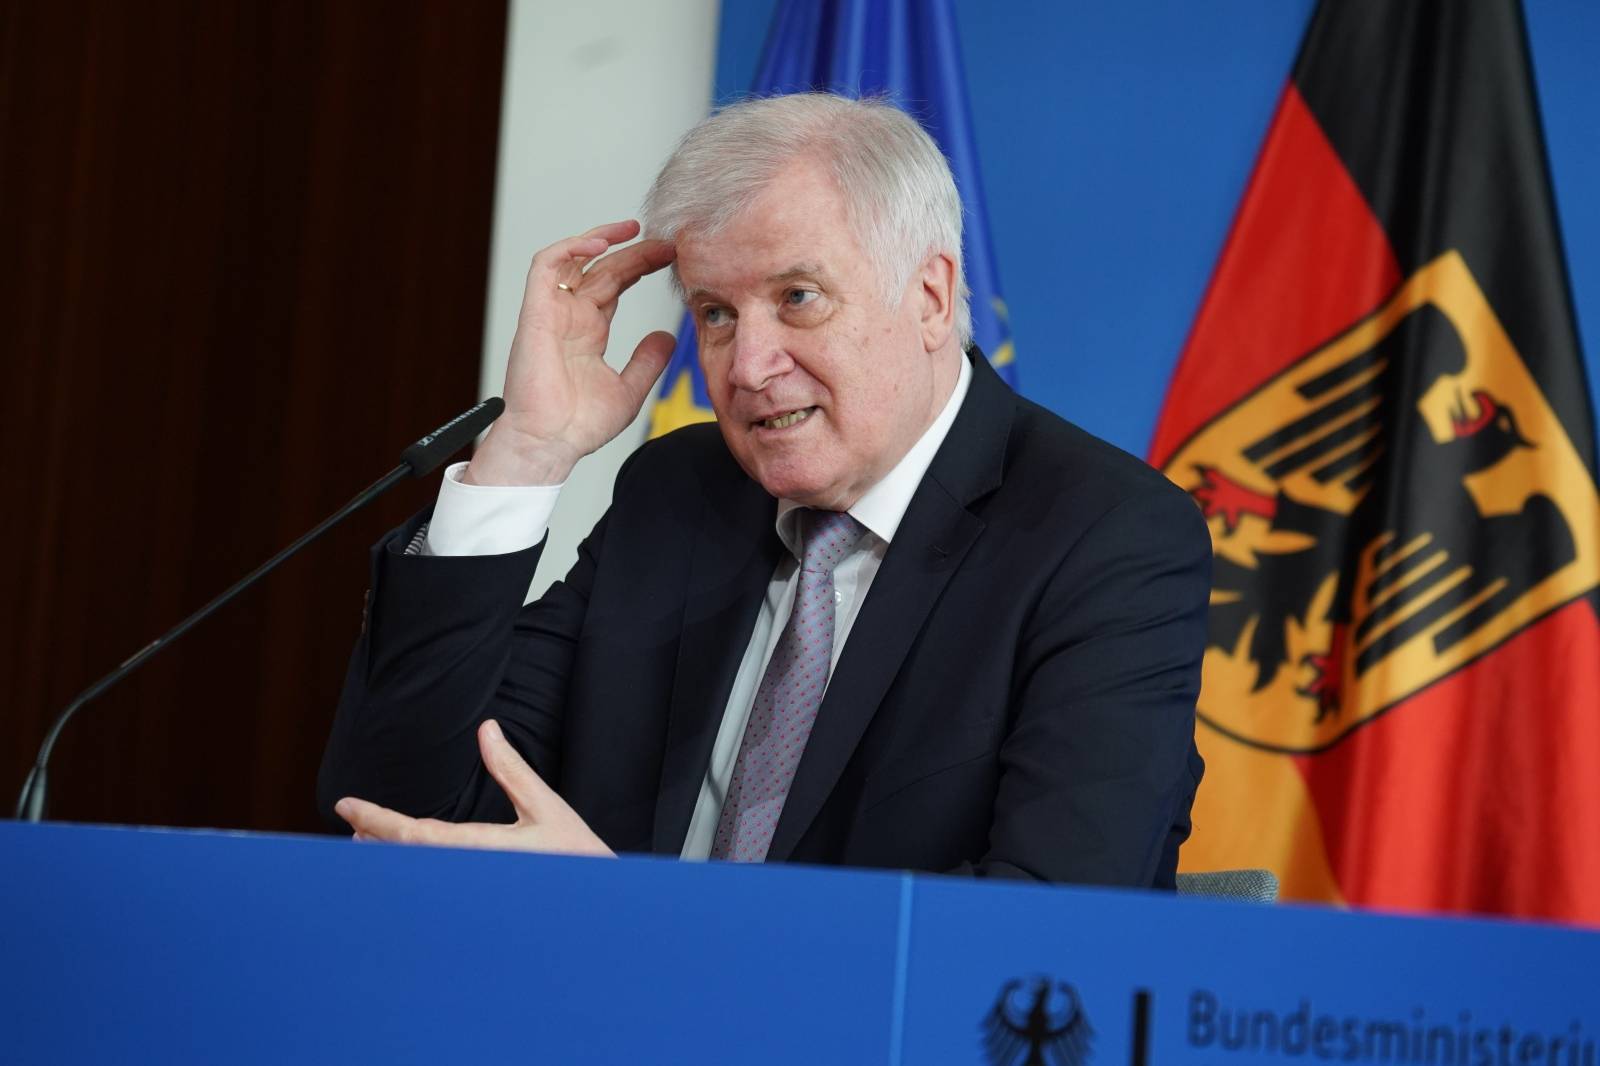 Press conference by Interior Minister Seehofer on internal border controls